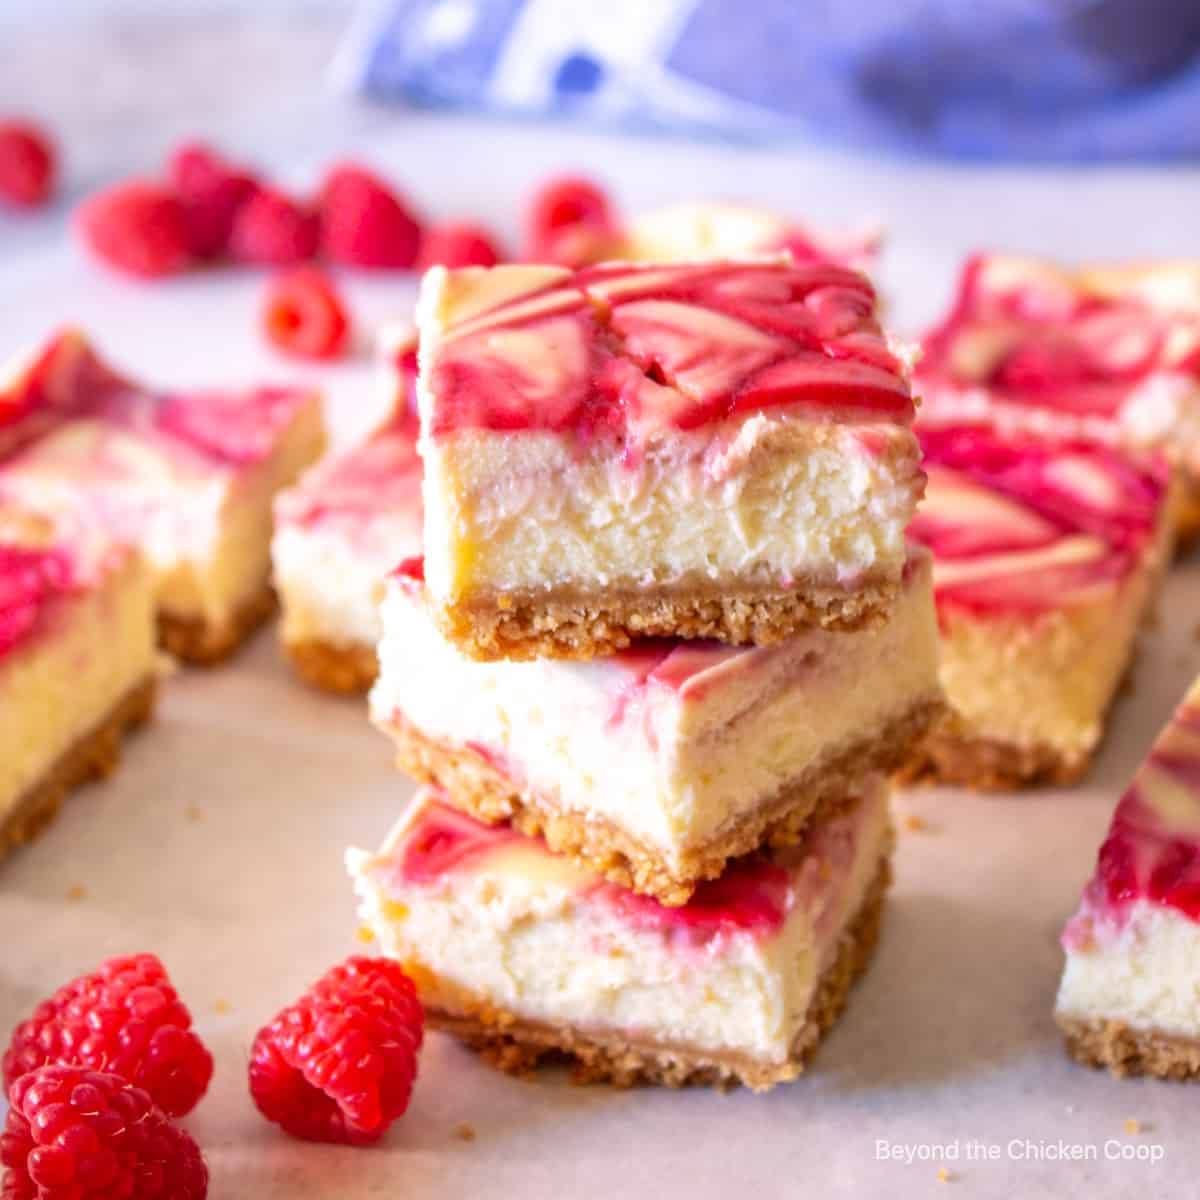 Three cheesecake bars stacked on top of each other.